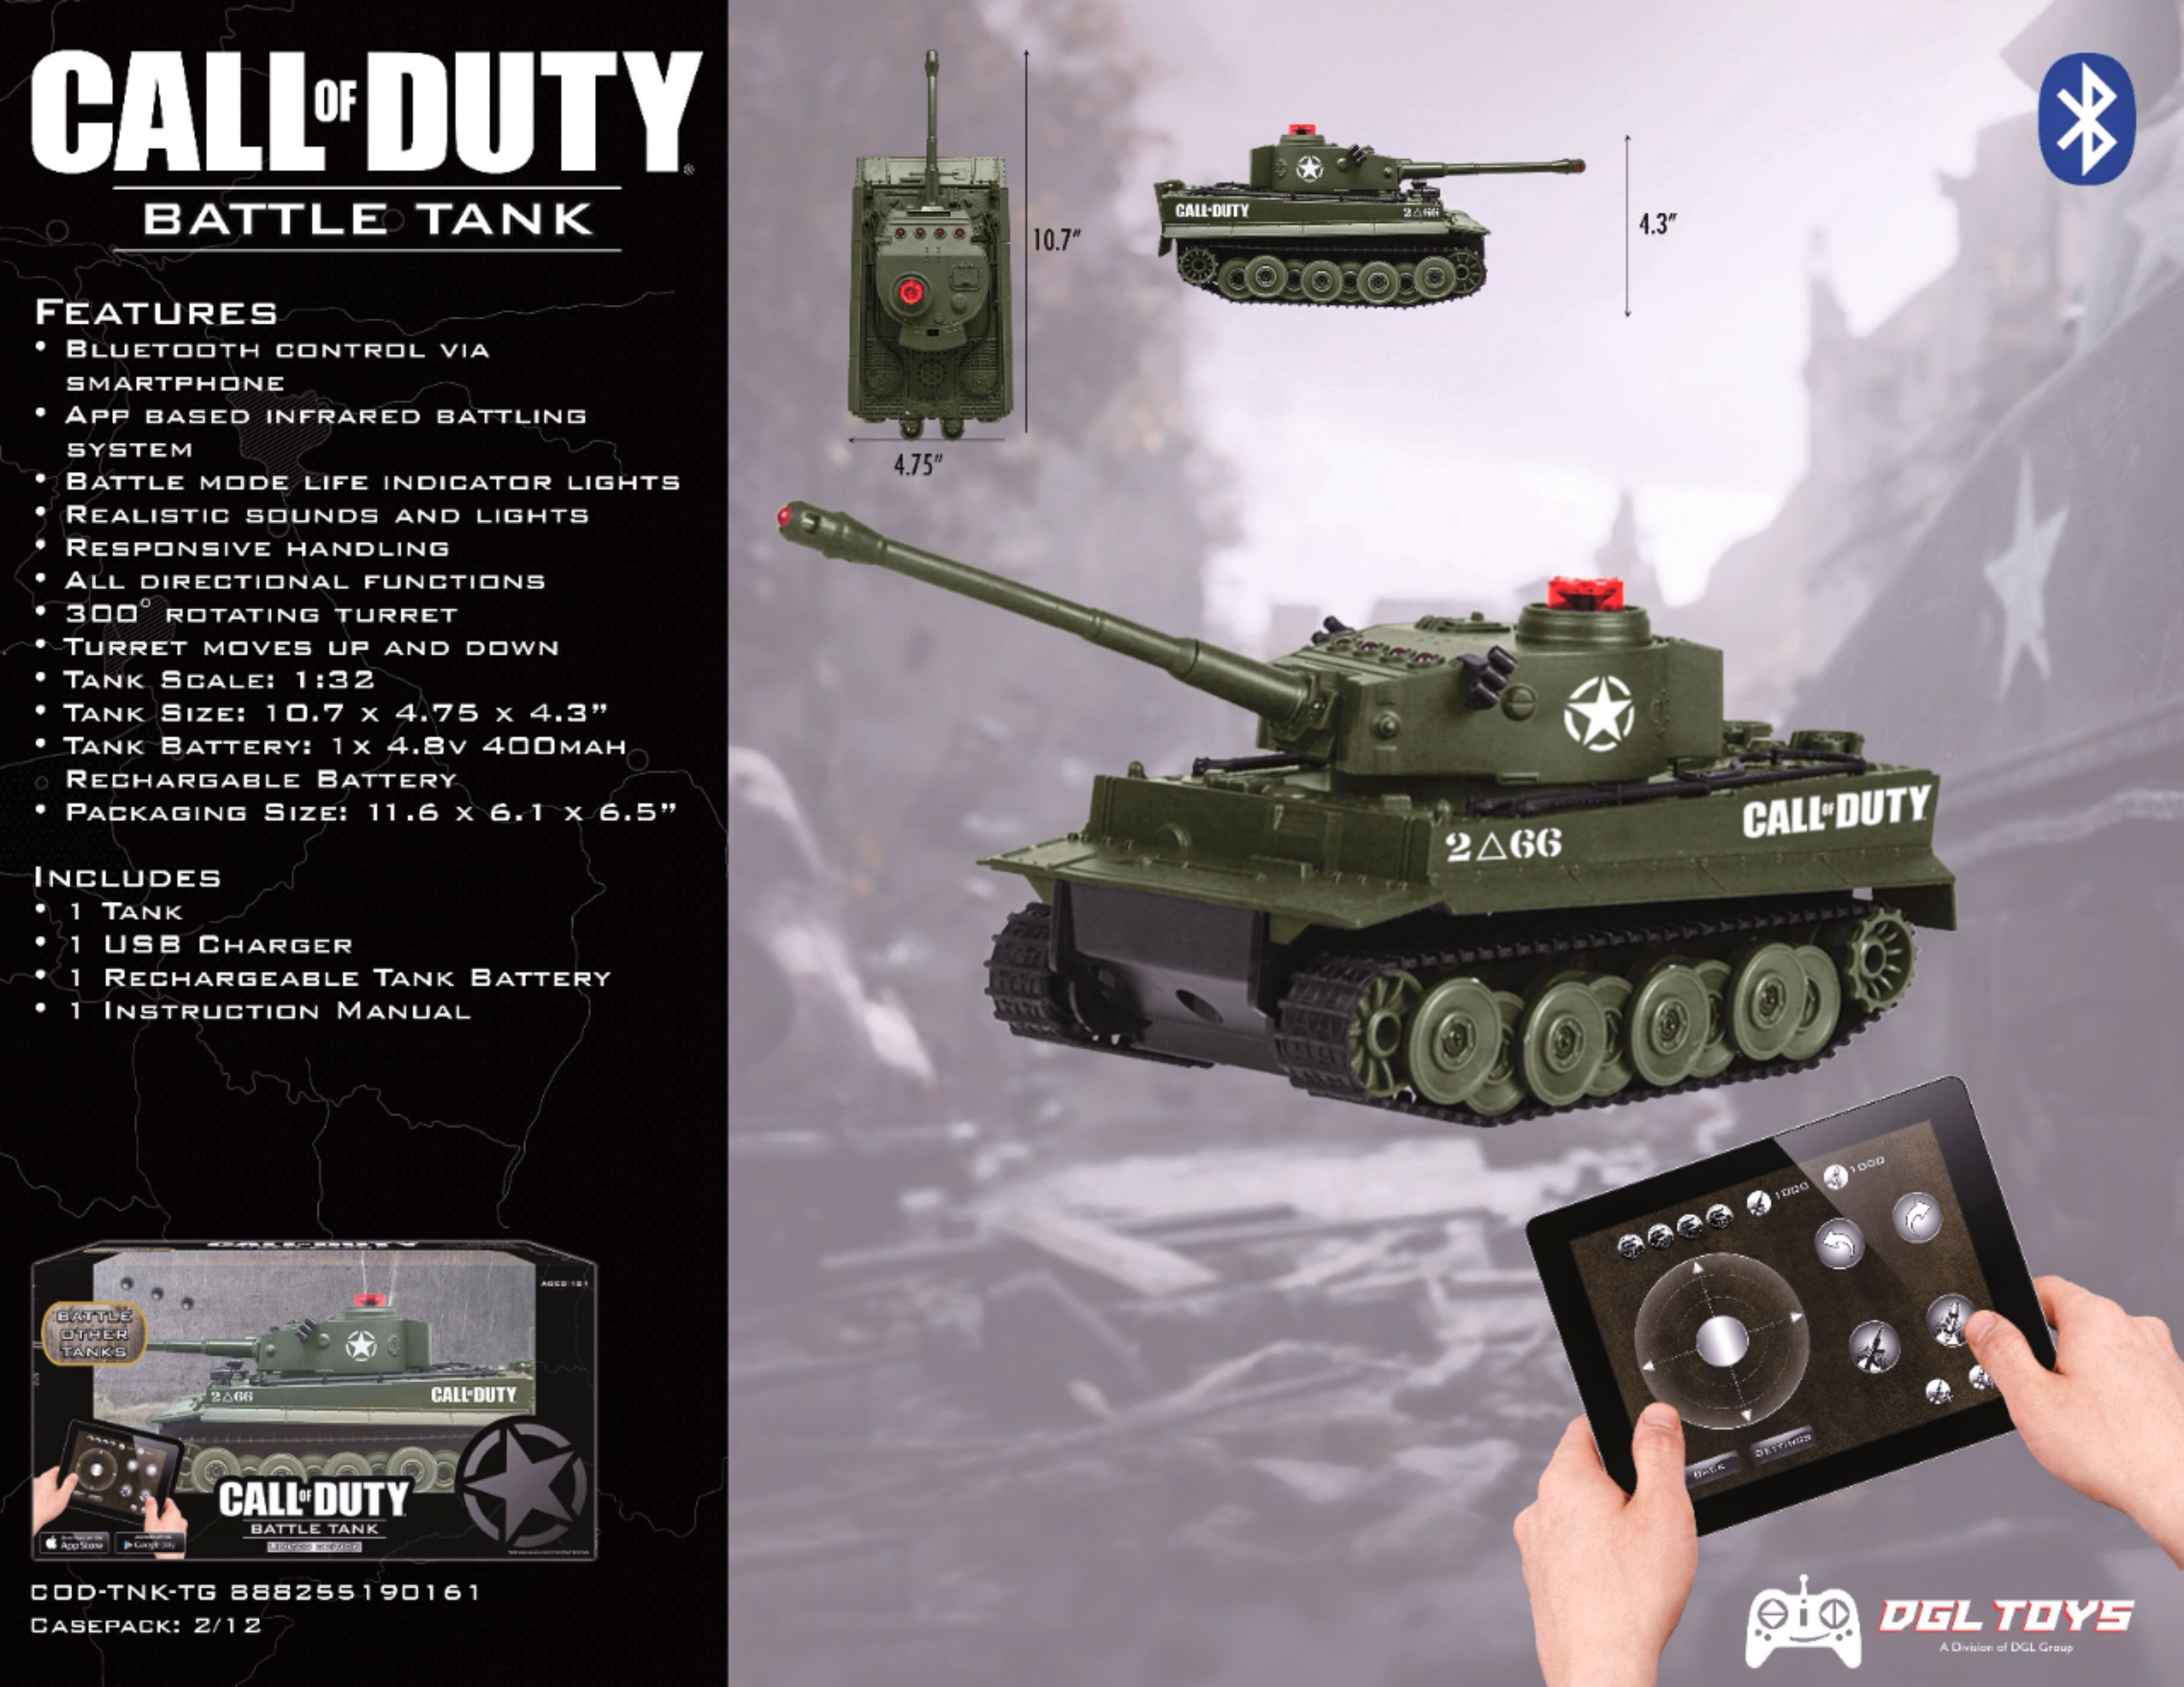 call of duty remote control tank